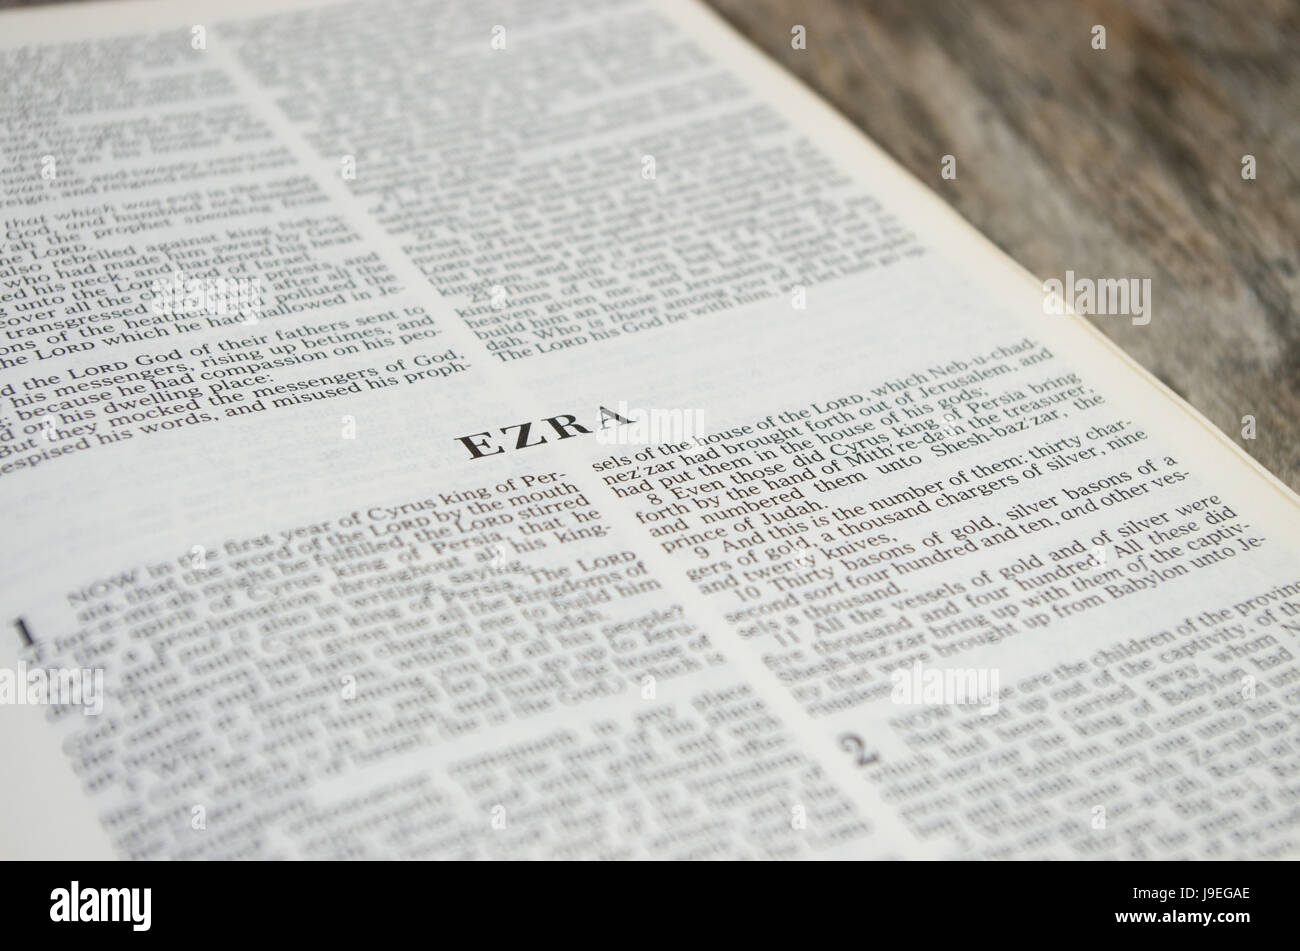 Title page for the book of Ezra in the Bible – King James Version Stock Photo